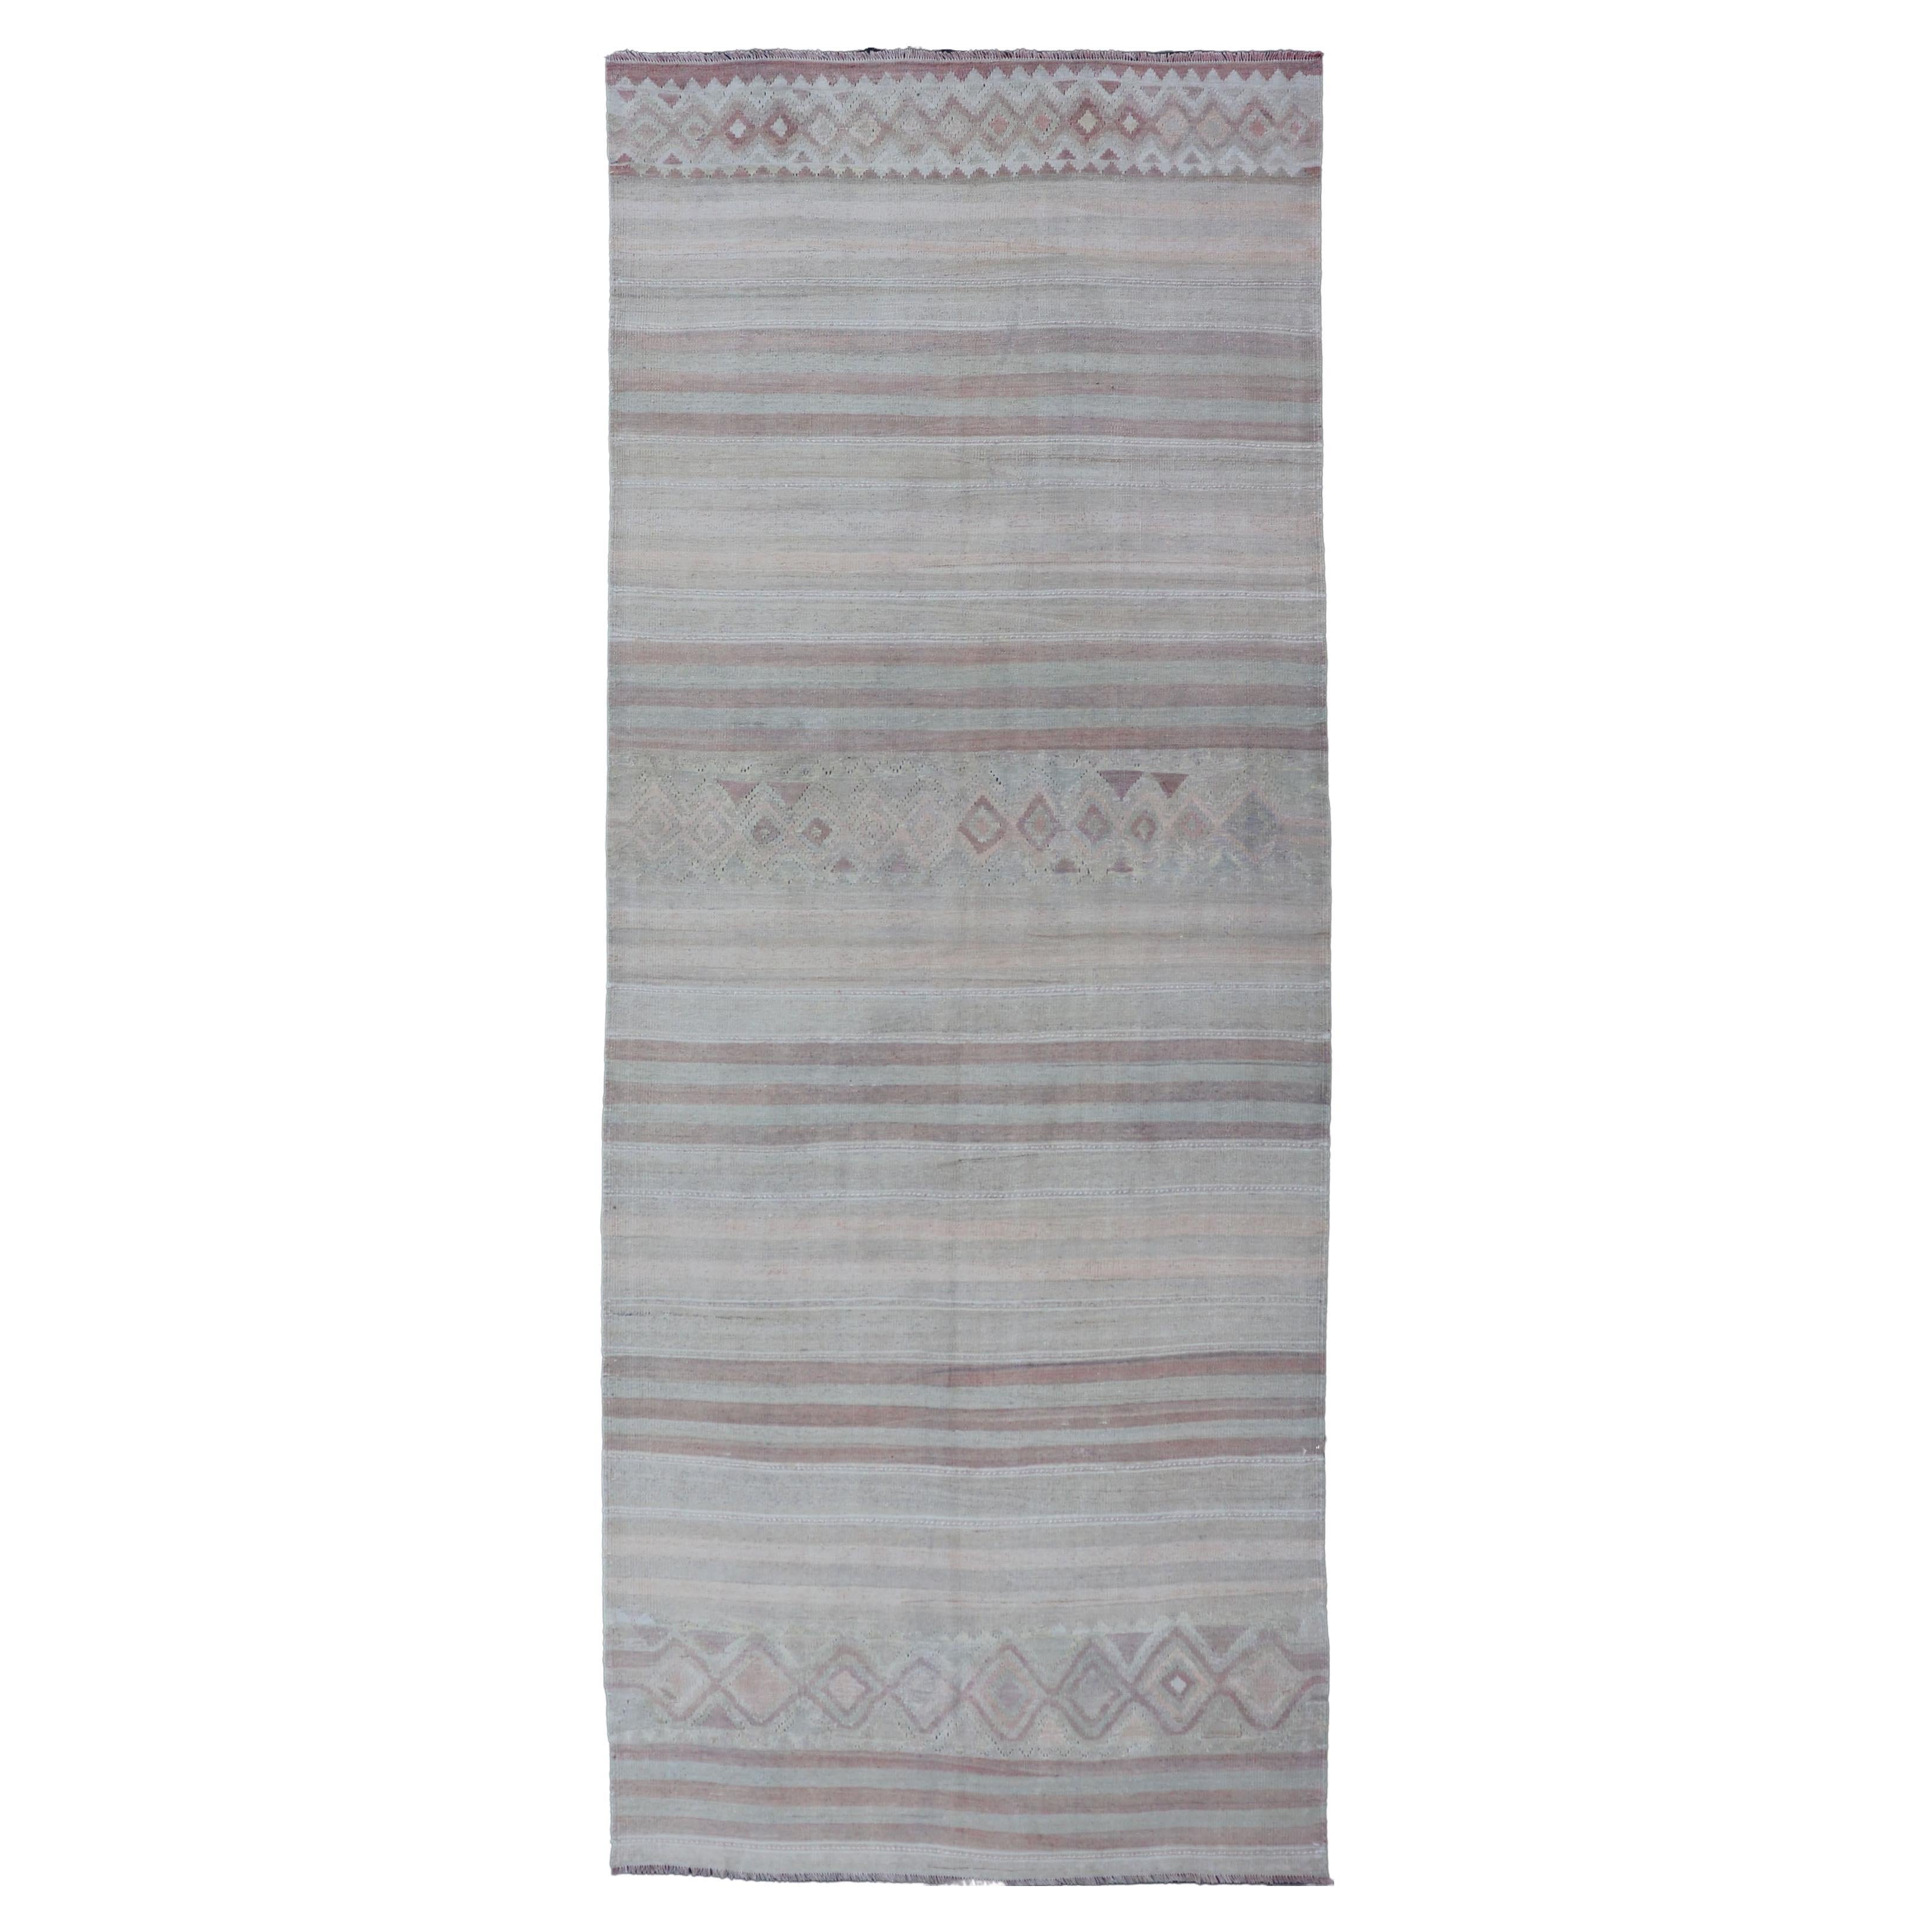  Vintage Turkish Gallery Kilim Runner with Creams, Soft Coral and Light Brown